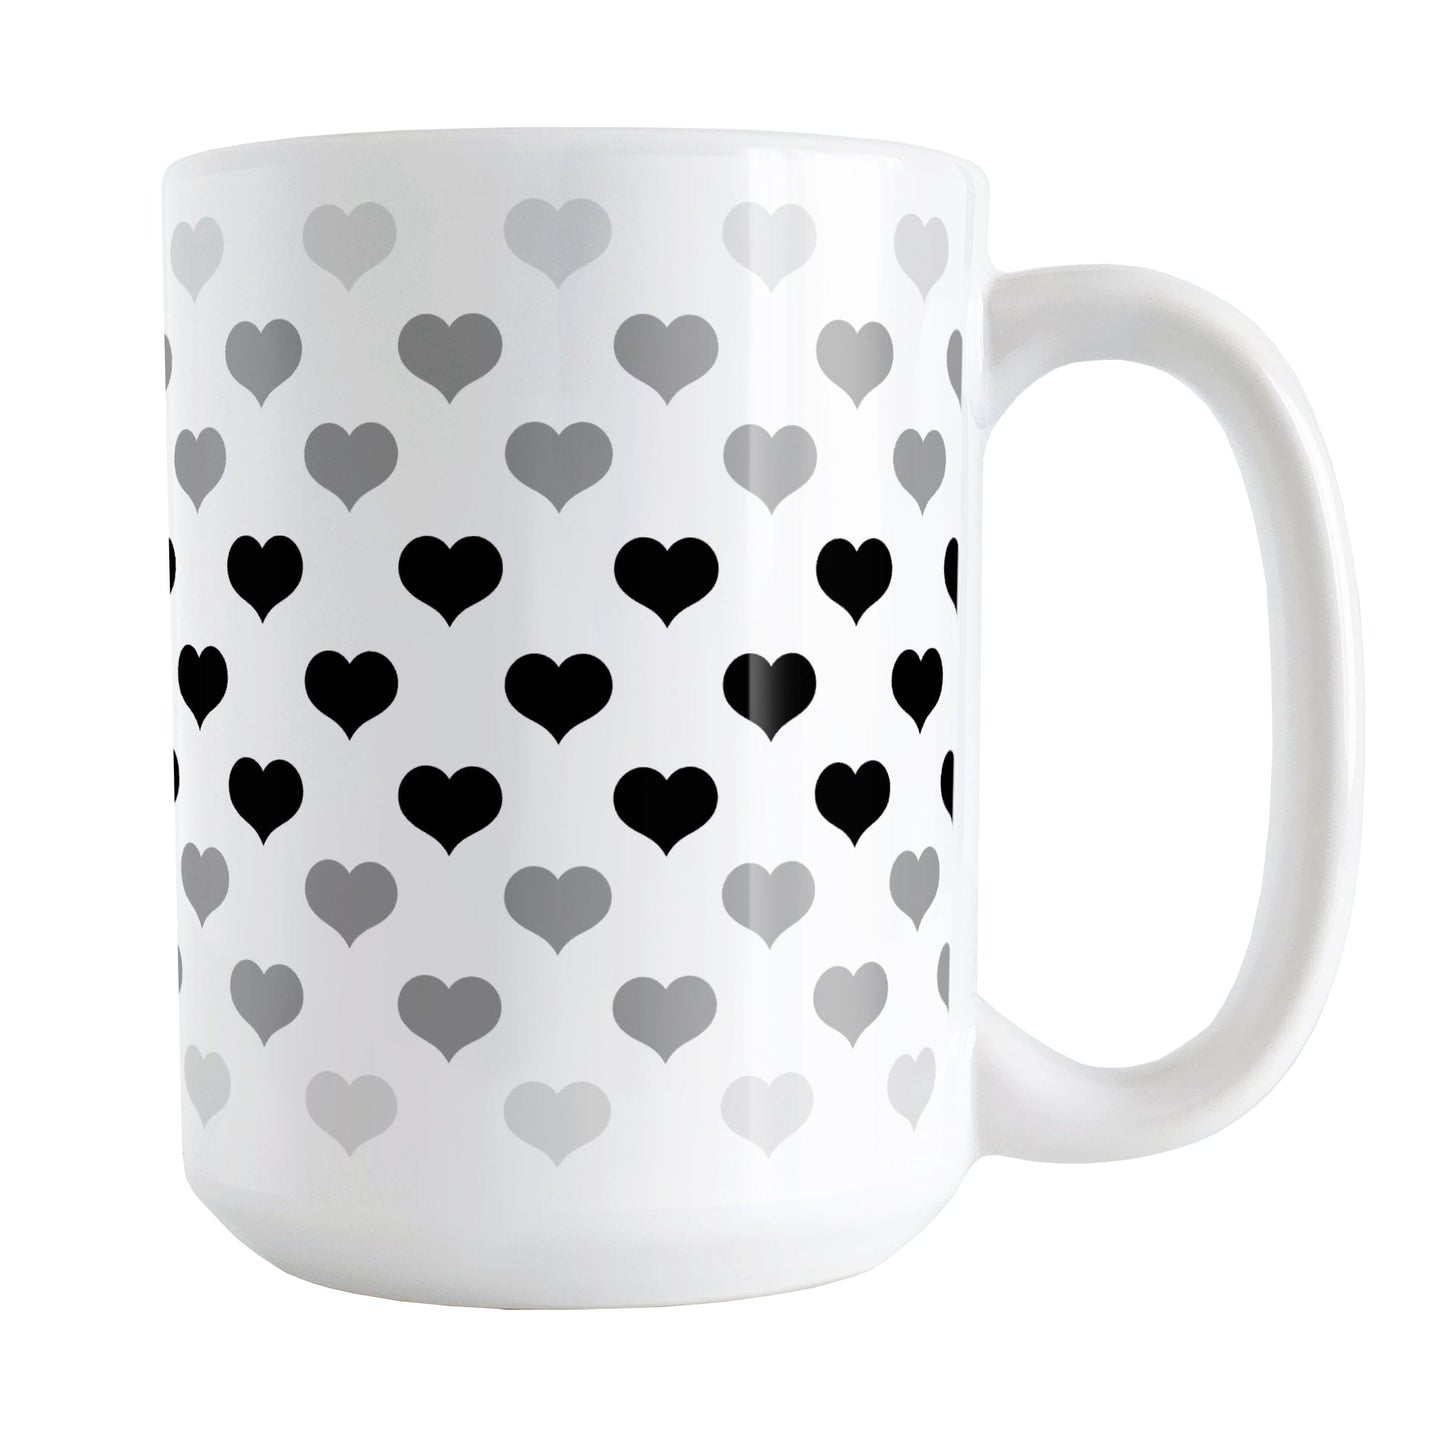 Hearts in Black Mug (15oz) at Amy's Coffee Mugs. A ceramic coffee mug designed with hearts in different shades of black and gray, with black across the middle and the lighter gray along the top and bottom, in a pattern that wraps around the mug to the handle. 